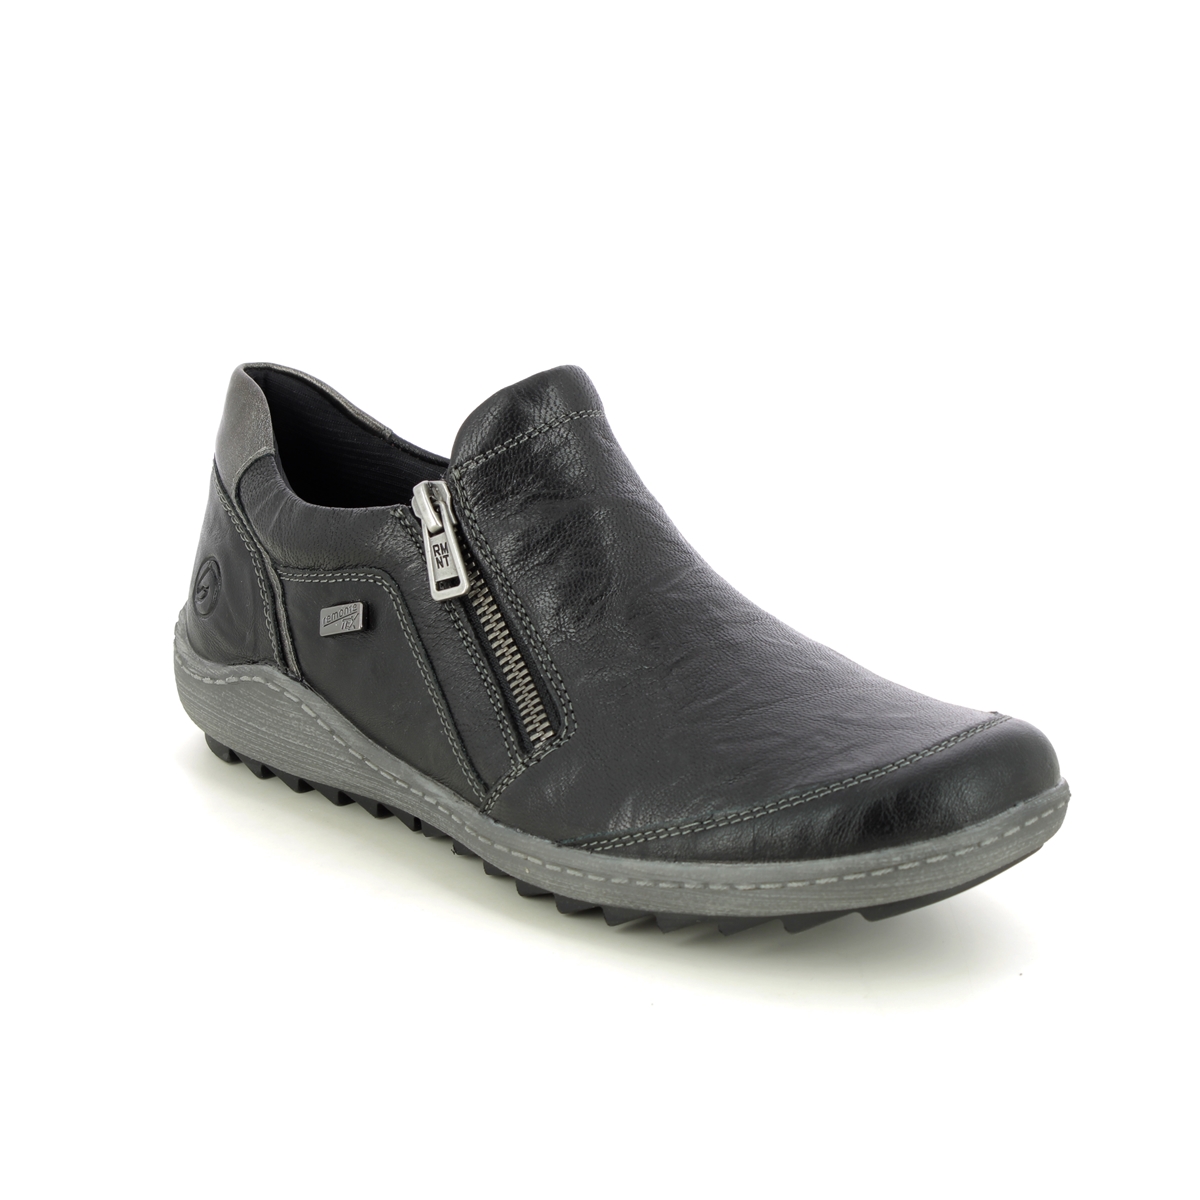 Remonte Zigshu Slip Tex Black Leather Womens Comfort Slip On Shoes R1428-03 In Size 41 In Plain Black Leather